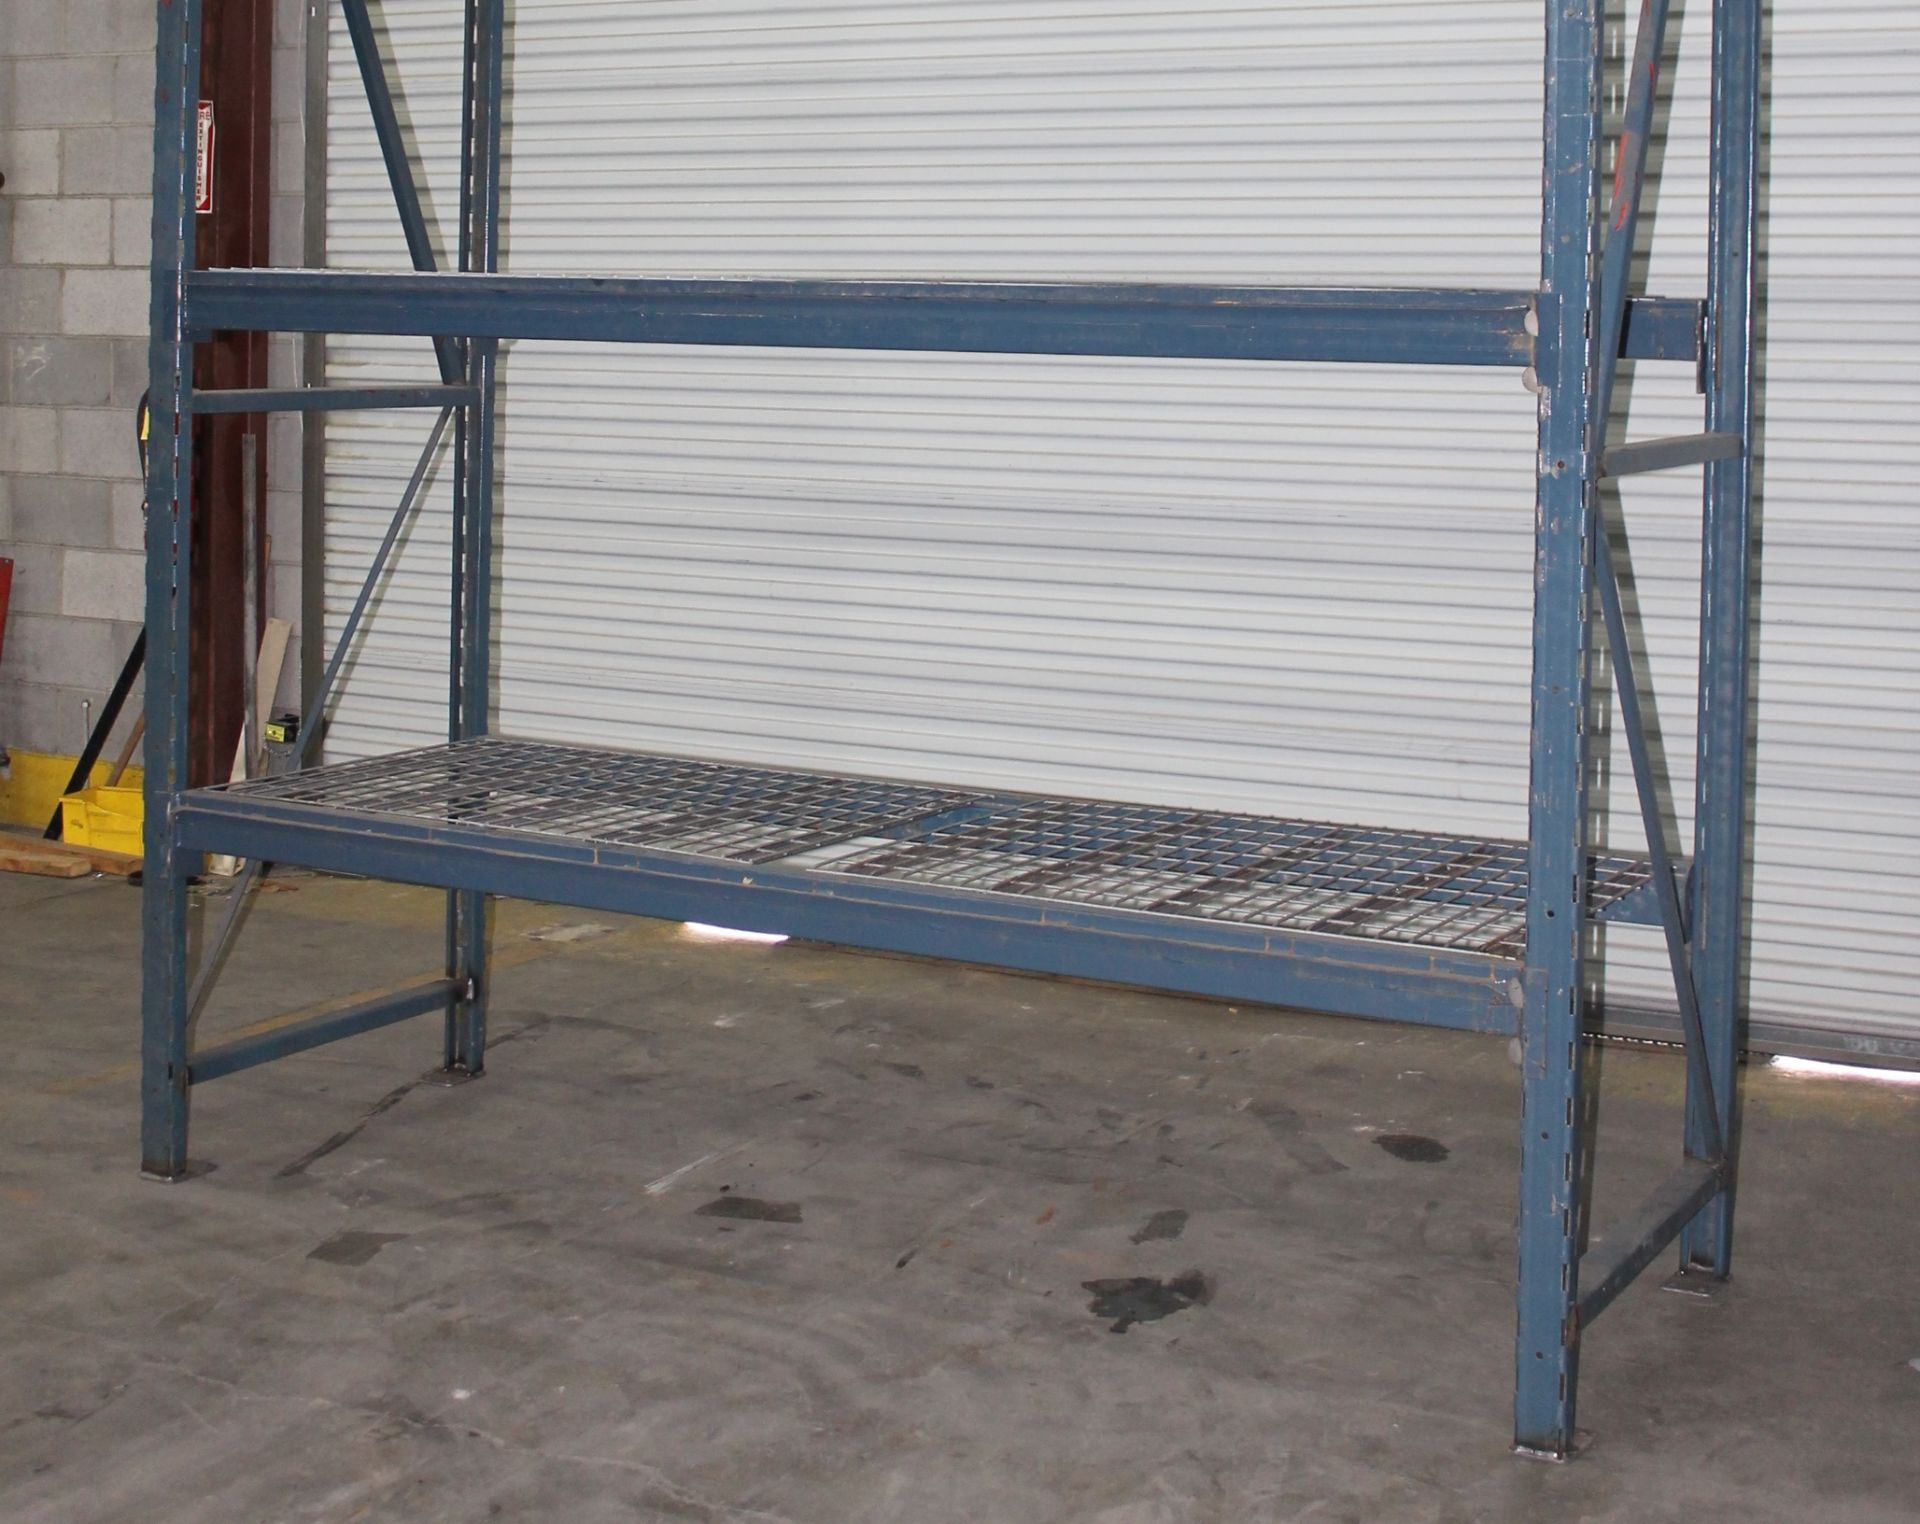 96"H X 36"D X 96"L STOCK ROOM SHELVING, TOTAL 28 SECTIONS WITH 2 BEAM LEVELS EACH,  INCLUDES